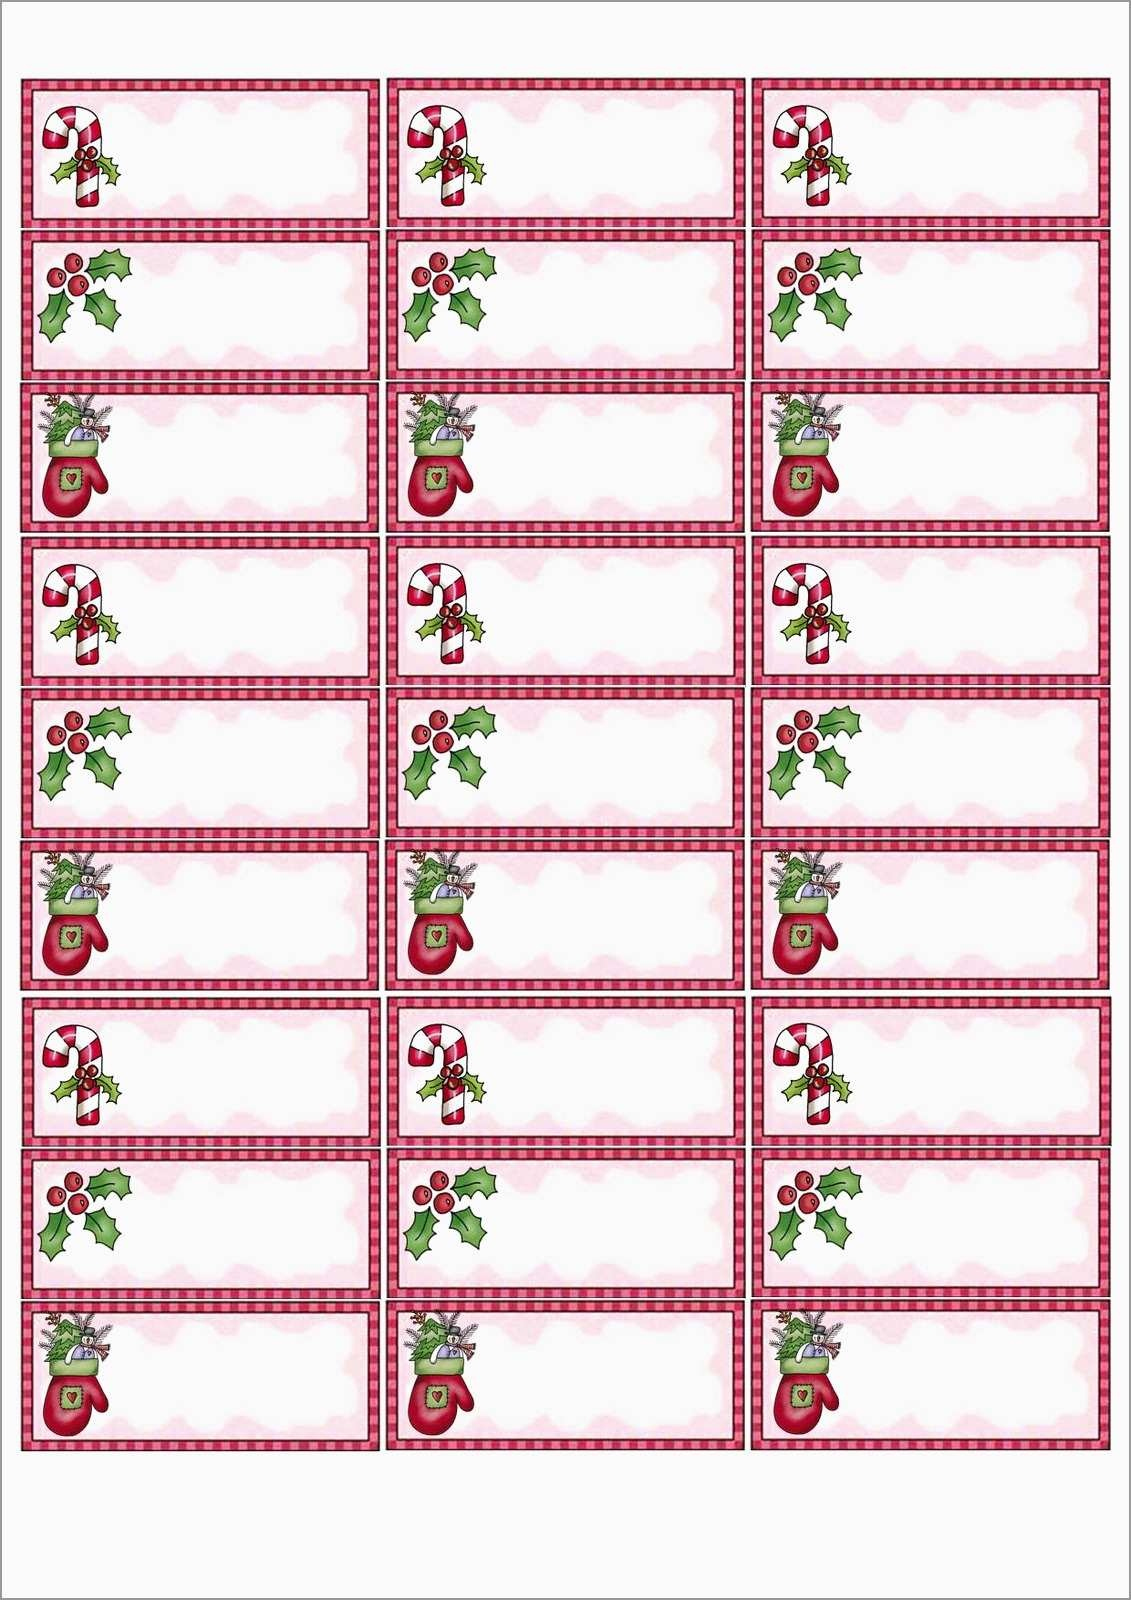 Avery 5160 Free Template Top Sellers | Www.waga.it inside Free Printable Labels Avery 5160